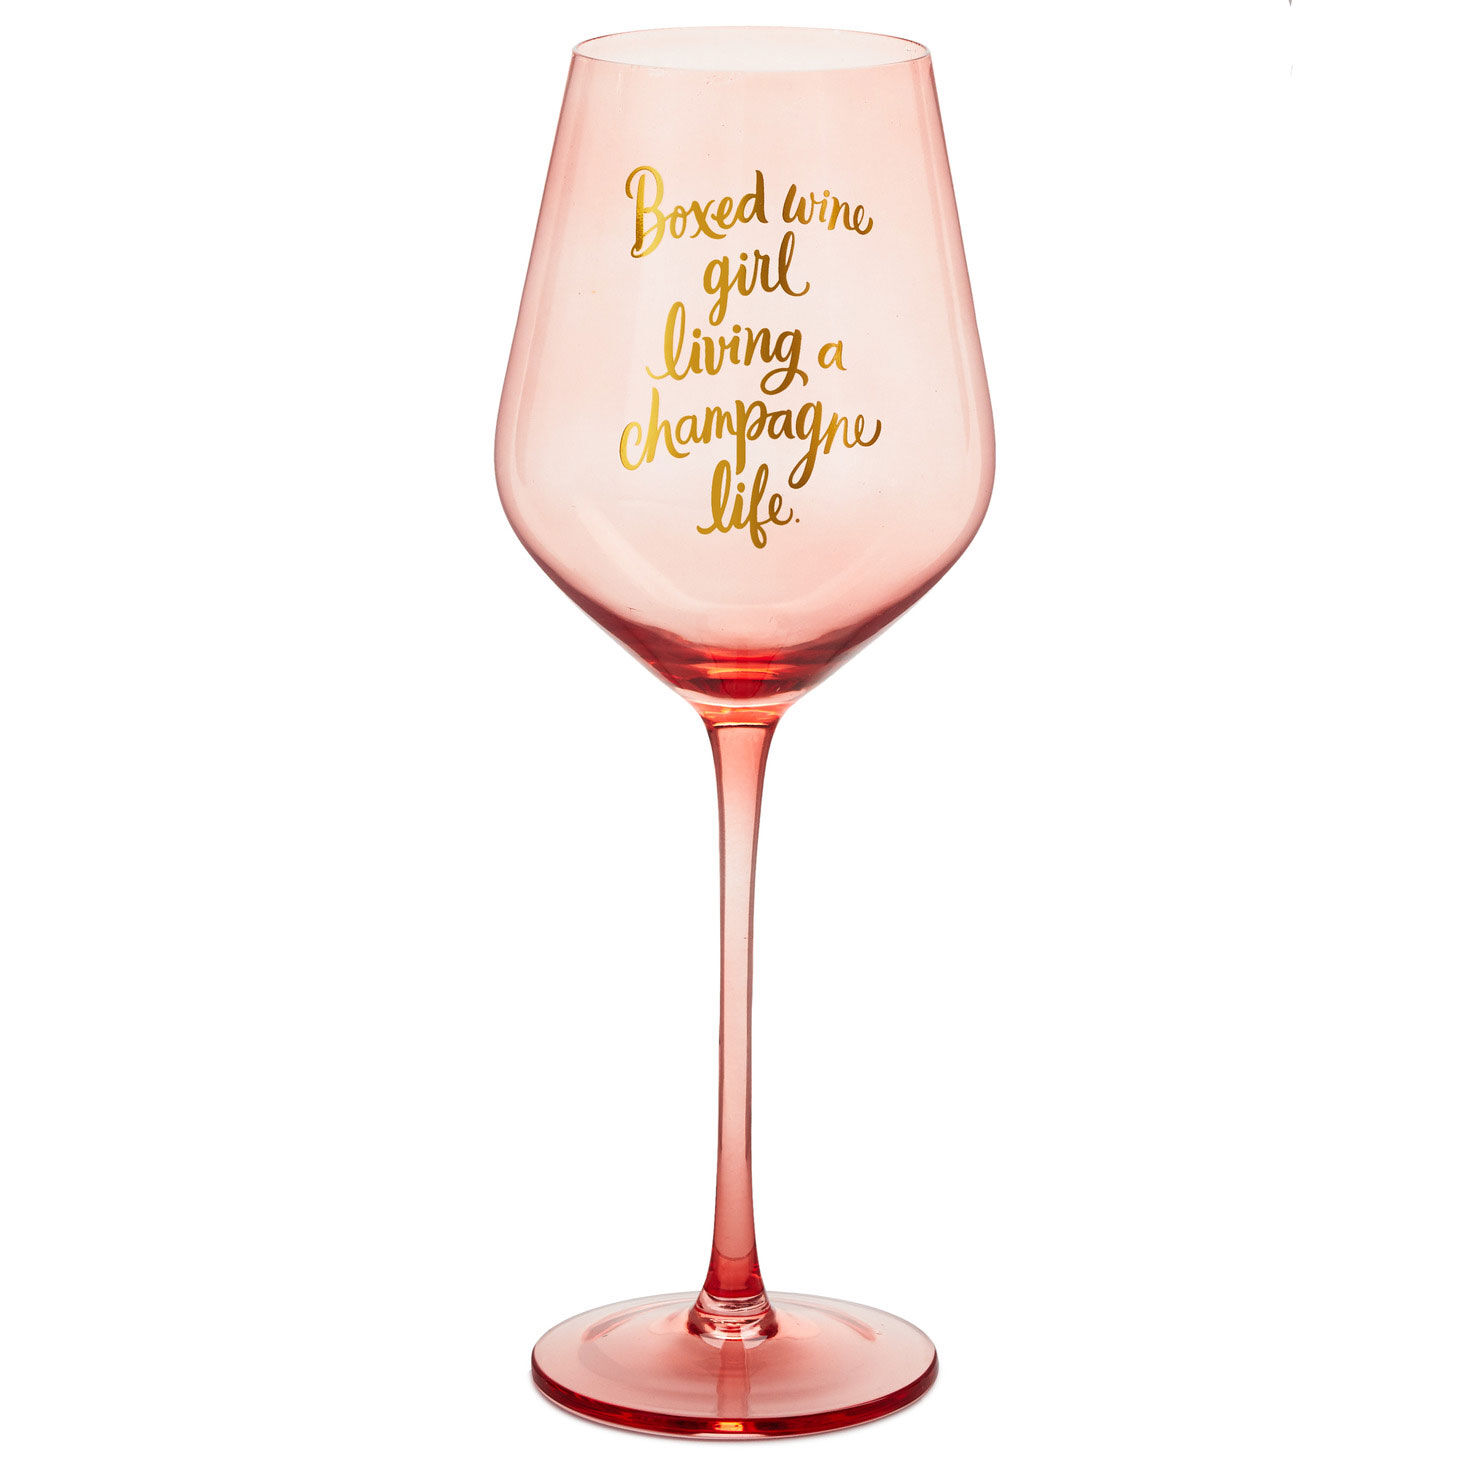 https://www.hallmark.com/dw/image/v2/AALB_PRD/on/demandware.static/-/Sites-hallmark-master/default/dw6194376d/images/finished-goods/products/1BRW3218/Boxed-Wine-Girl-Wine-Glass_1BRW3218_01.jpg?sfrm=jpg